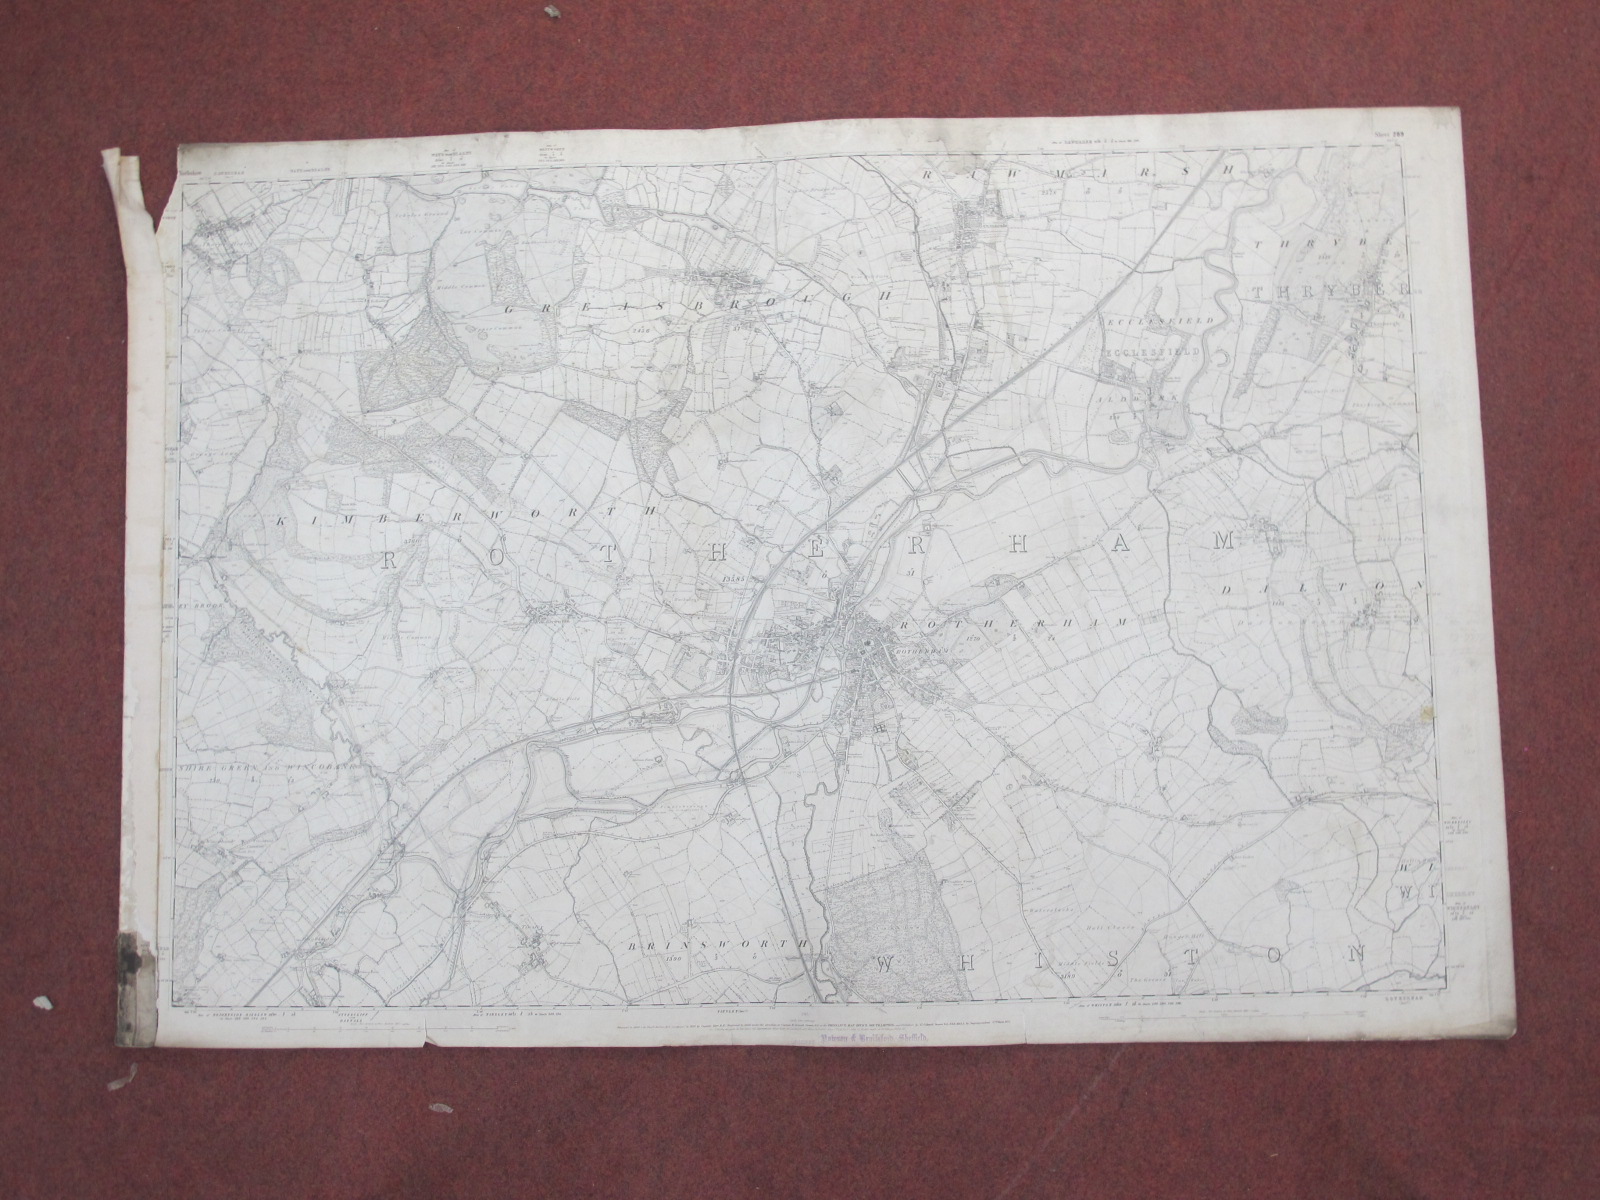 West Riding Yorkshire Maps, Rotherham, Treeton, North Anston and area - some dates noted 1931, 1935, - Image 10 of 10